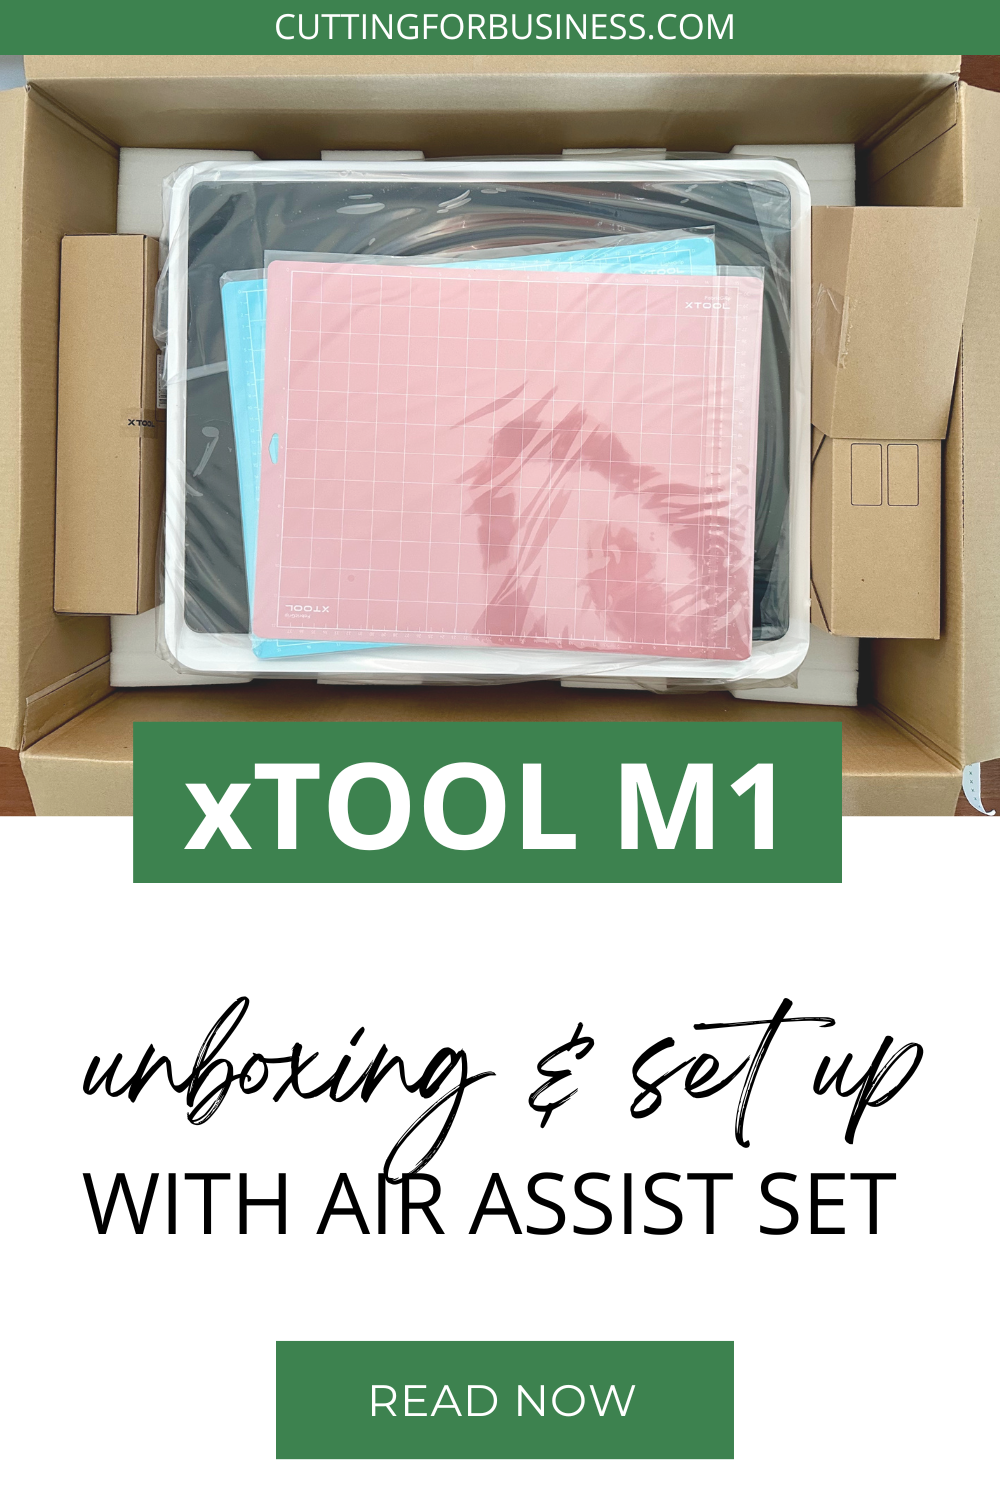 xTool M1 Set Up - Includes set up of the Air Assist Set - cuttingforbusiness.com. 